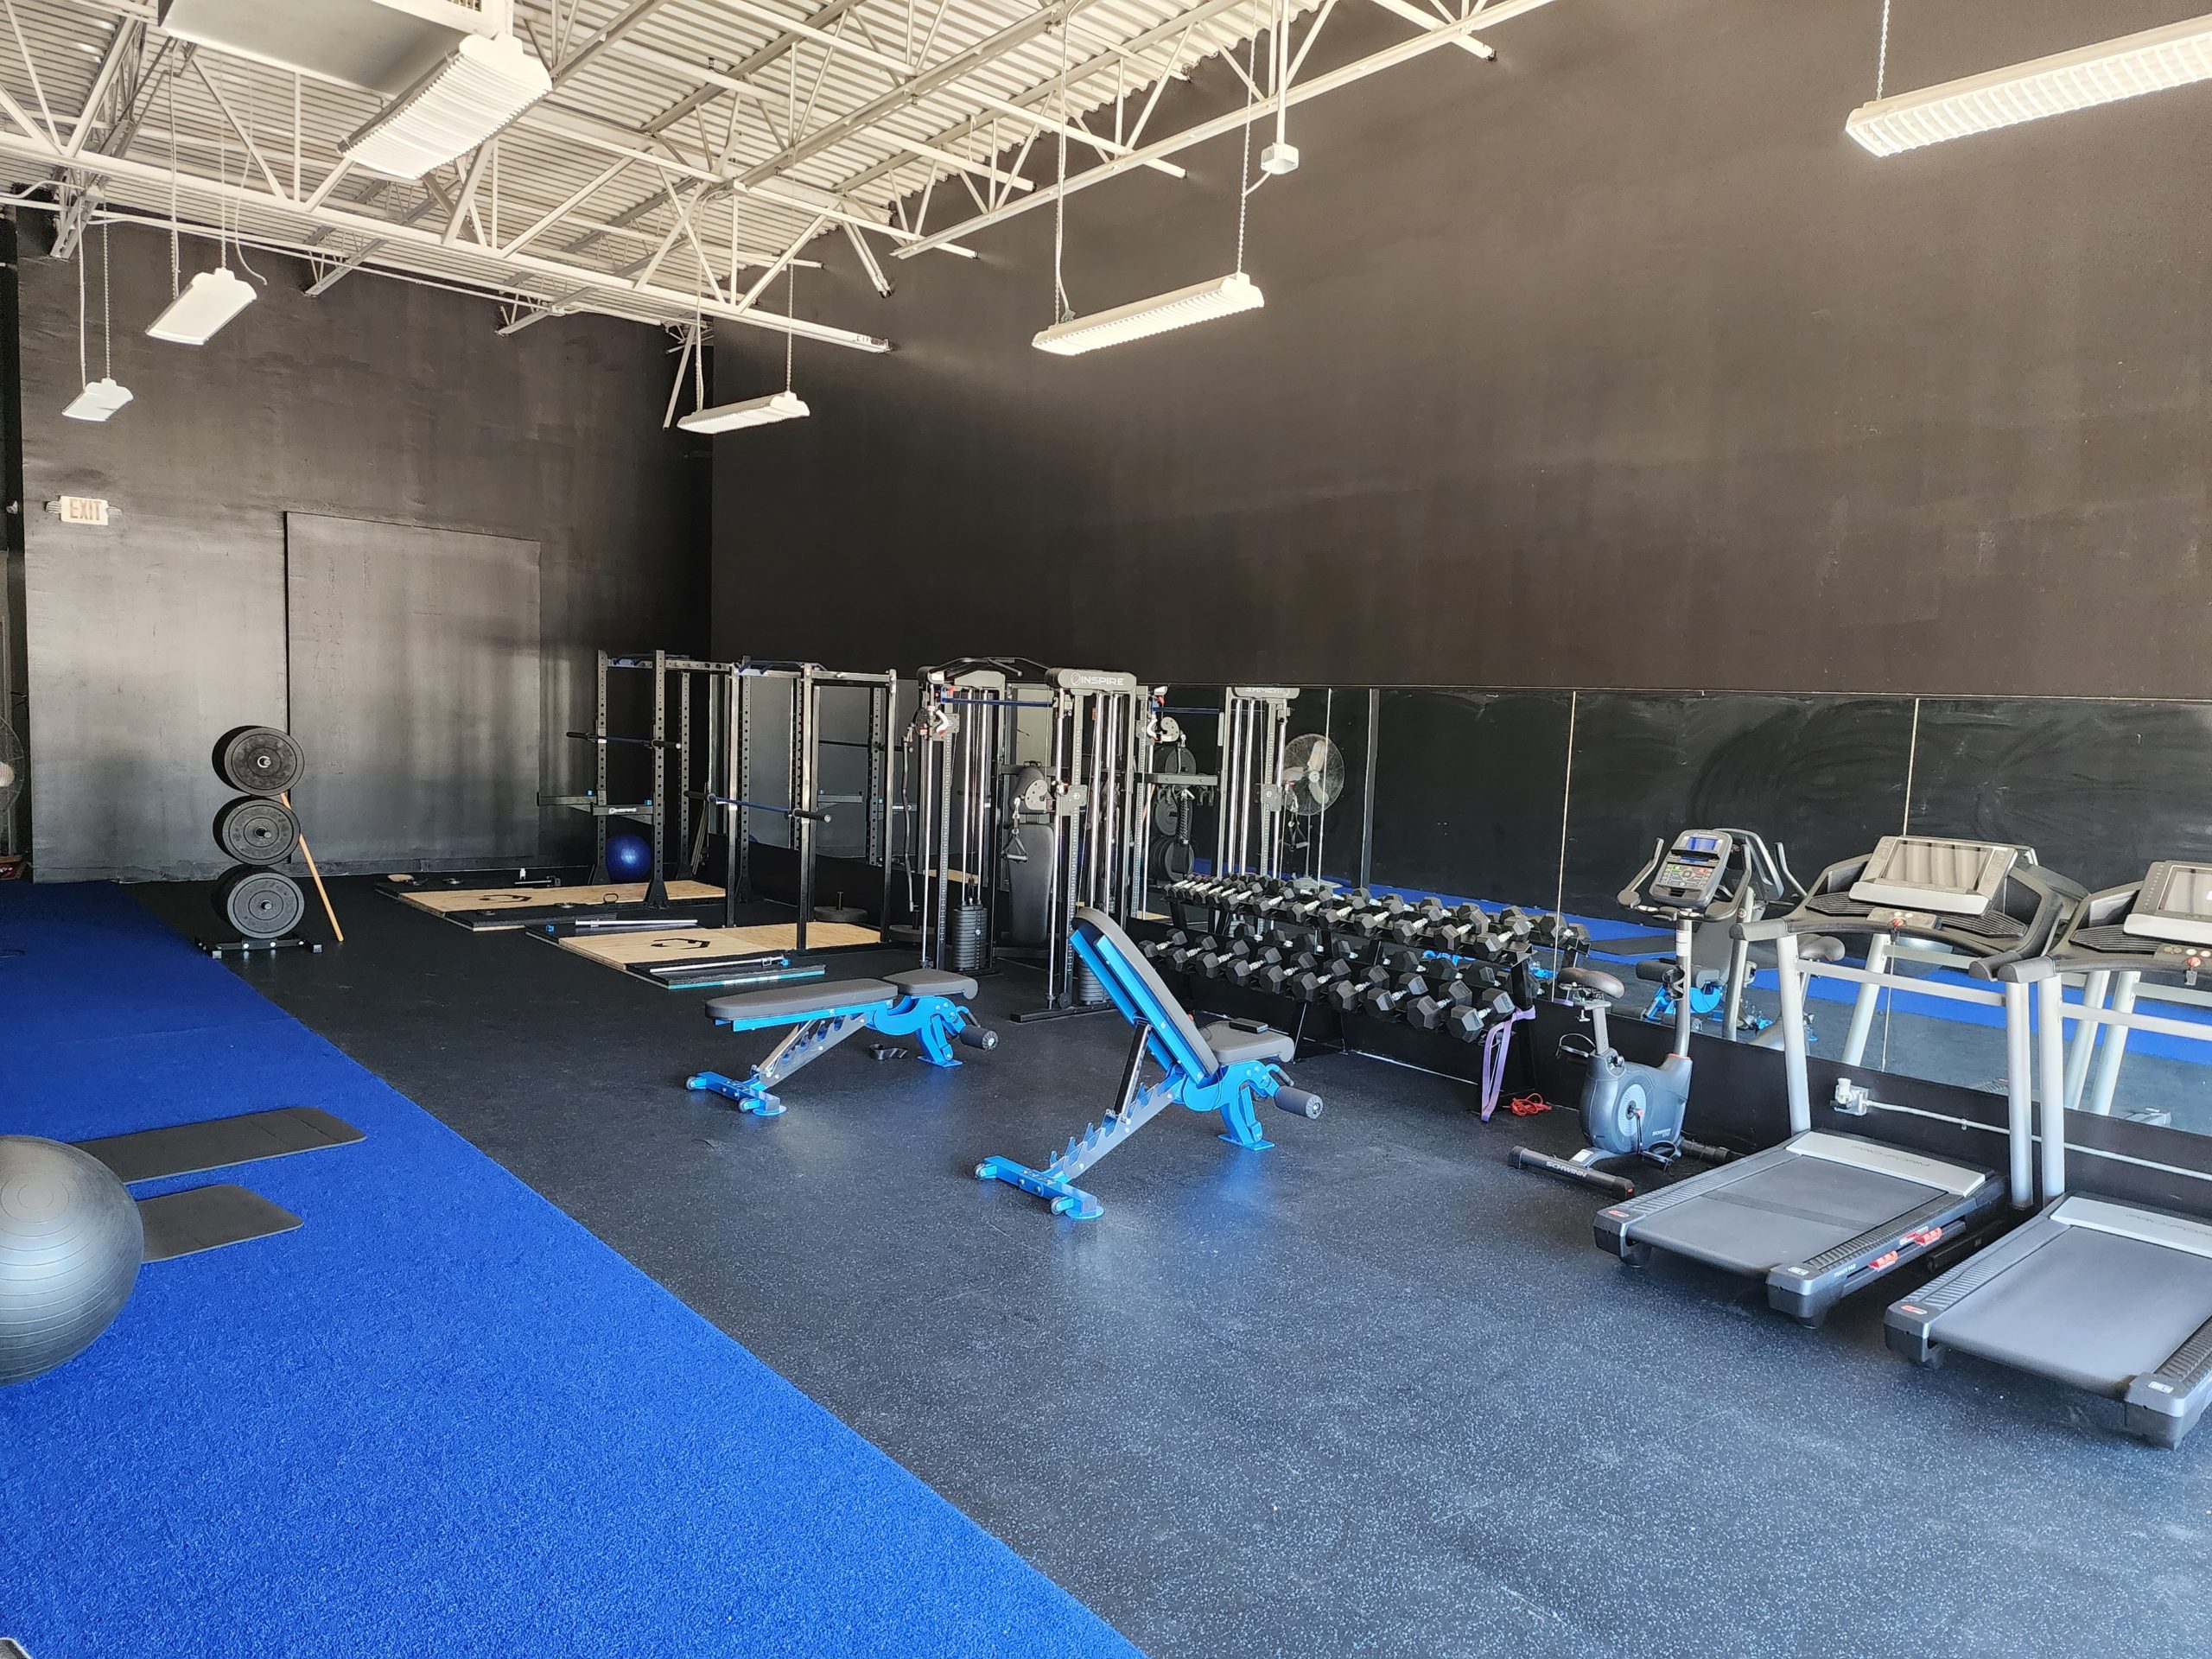 about us- the inside of the Fitness Minded personal training studio which shows from right to left 2 treadmills, 2 benches, dumbbell set, 2 squat racks, and blue turf